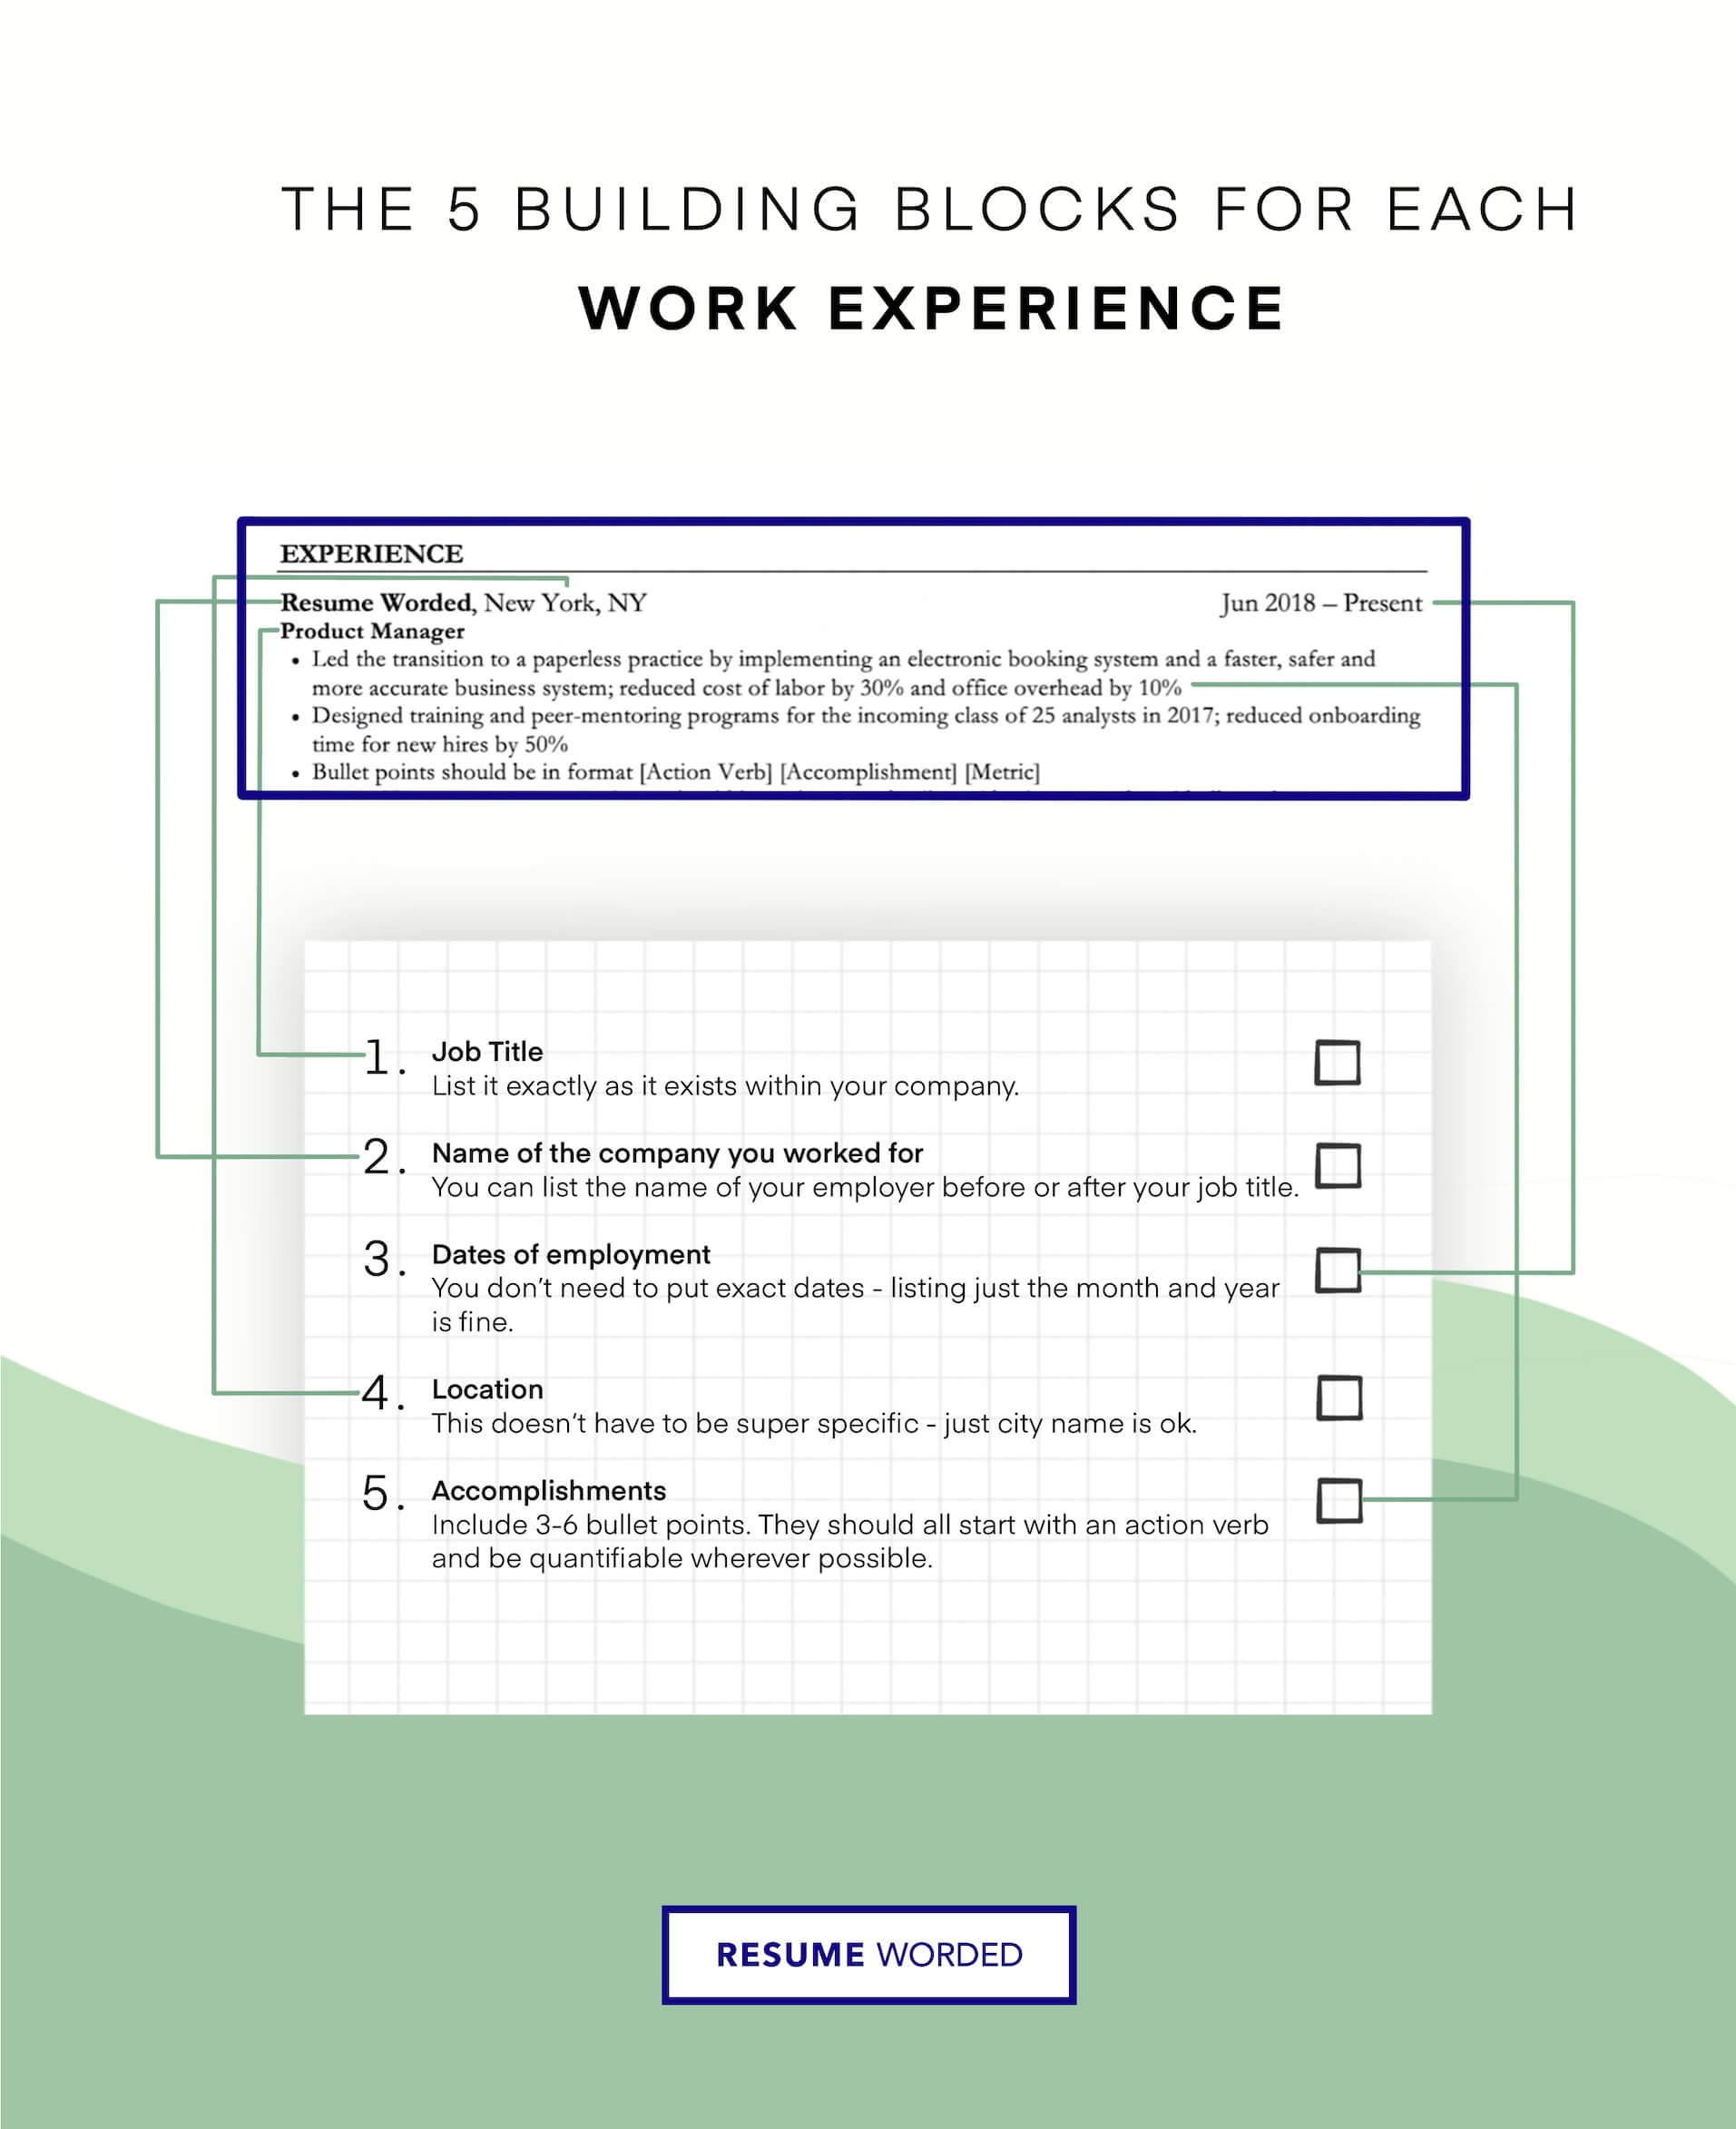 Create a wholesome experience list. - Director of Product Management Resume